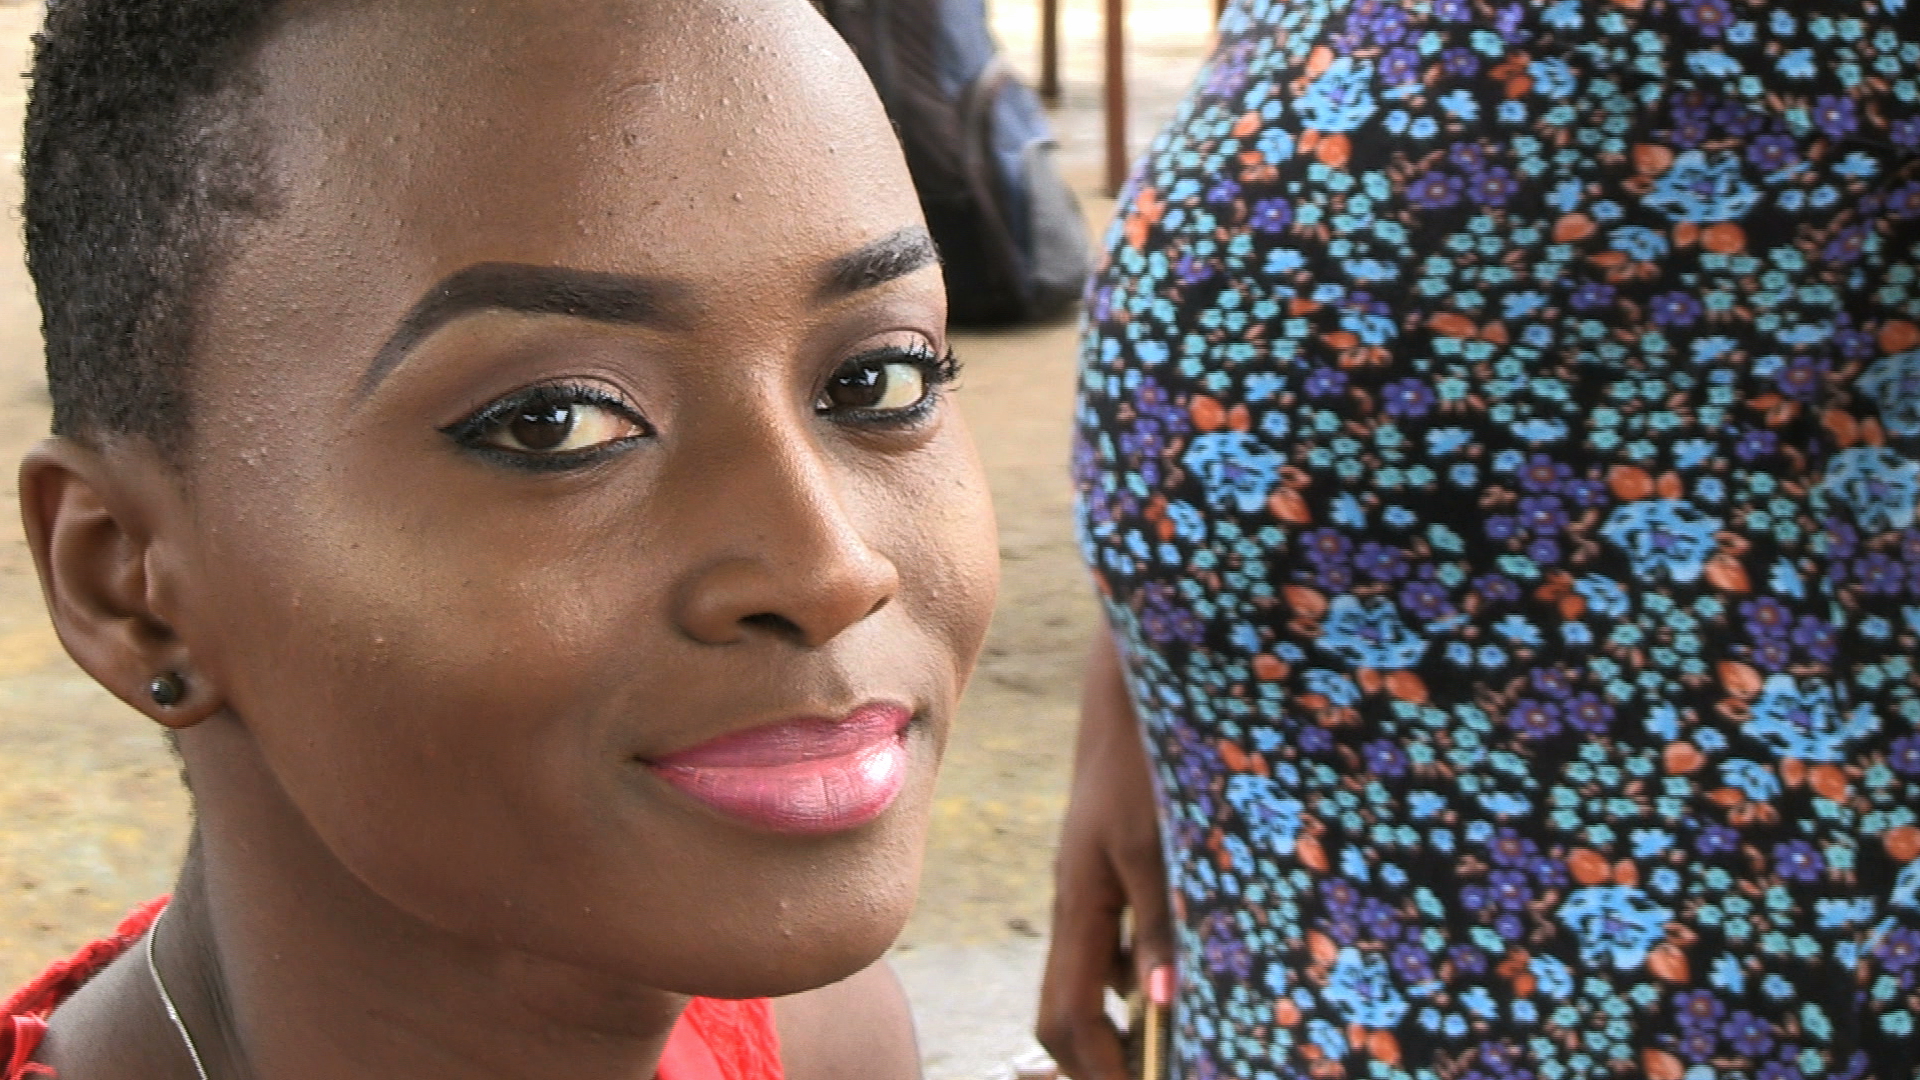 Beauty Queens to the rescue in Sierra Leone